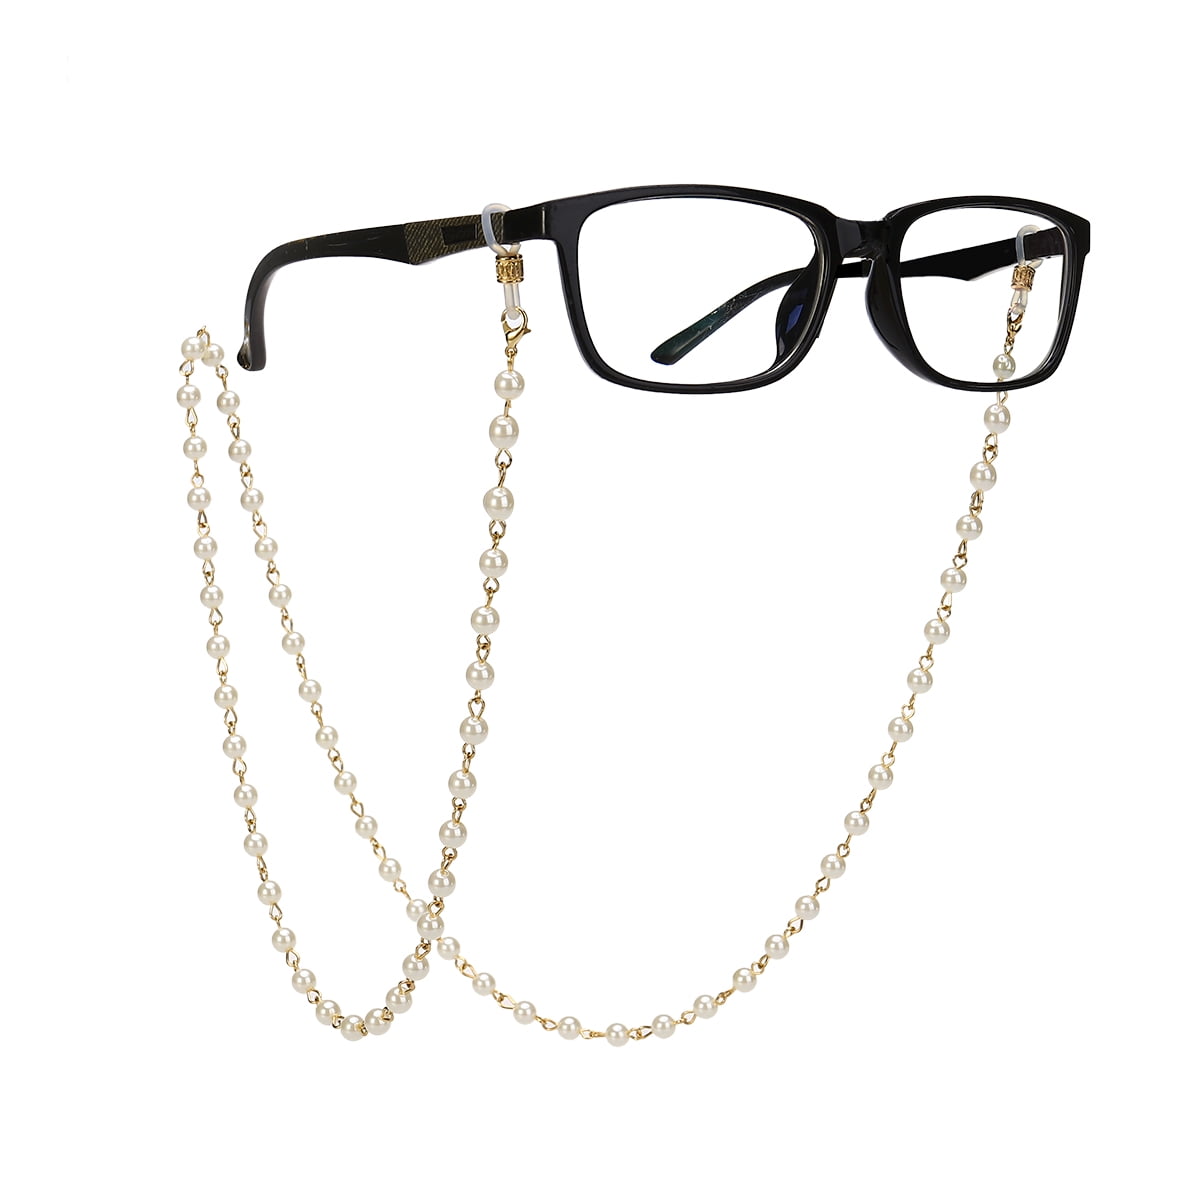 New Fashion Pendant Glasses Chains Wheat Ear Eyeglasses Sunglasses  Spectacles Metal Chain Holder Cord Lanyard Necklace